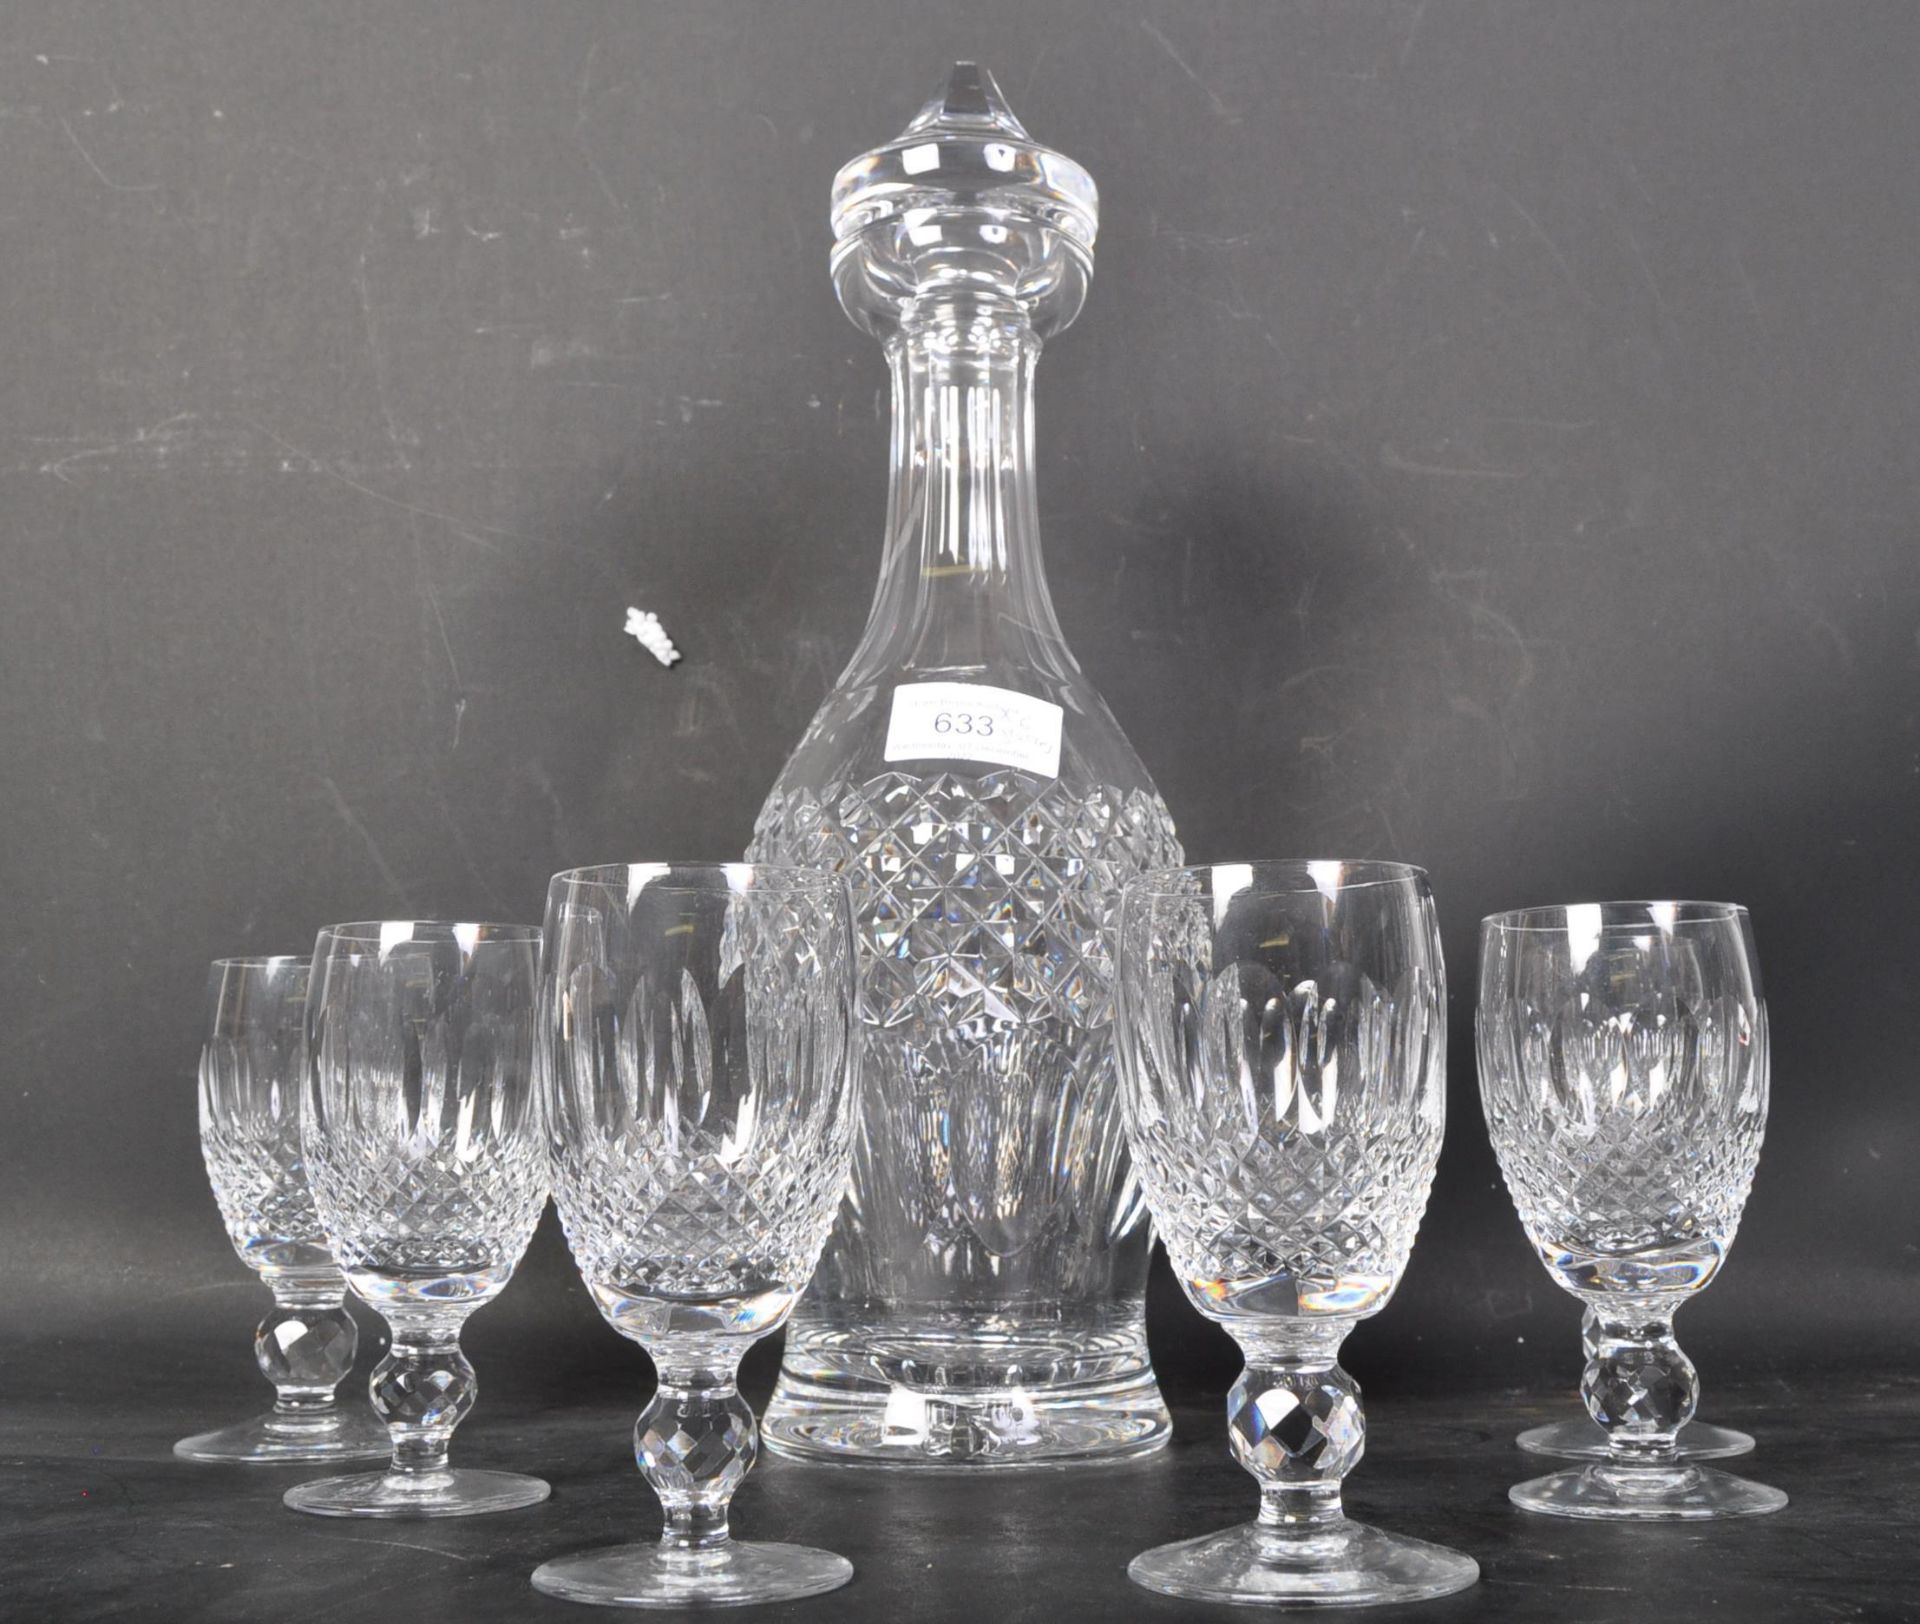 SIX VINTAGE WATERFORD CRYSTAL SHERRY GLASSES & DECANTER - Image 2 of 5